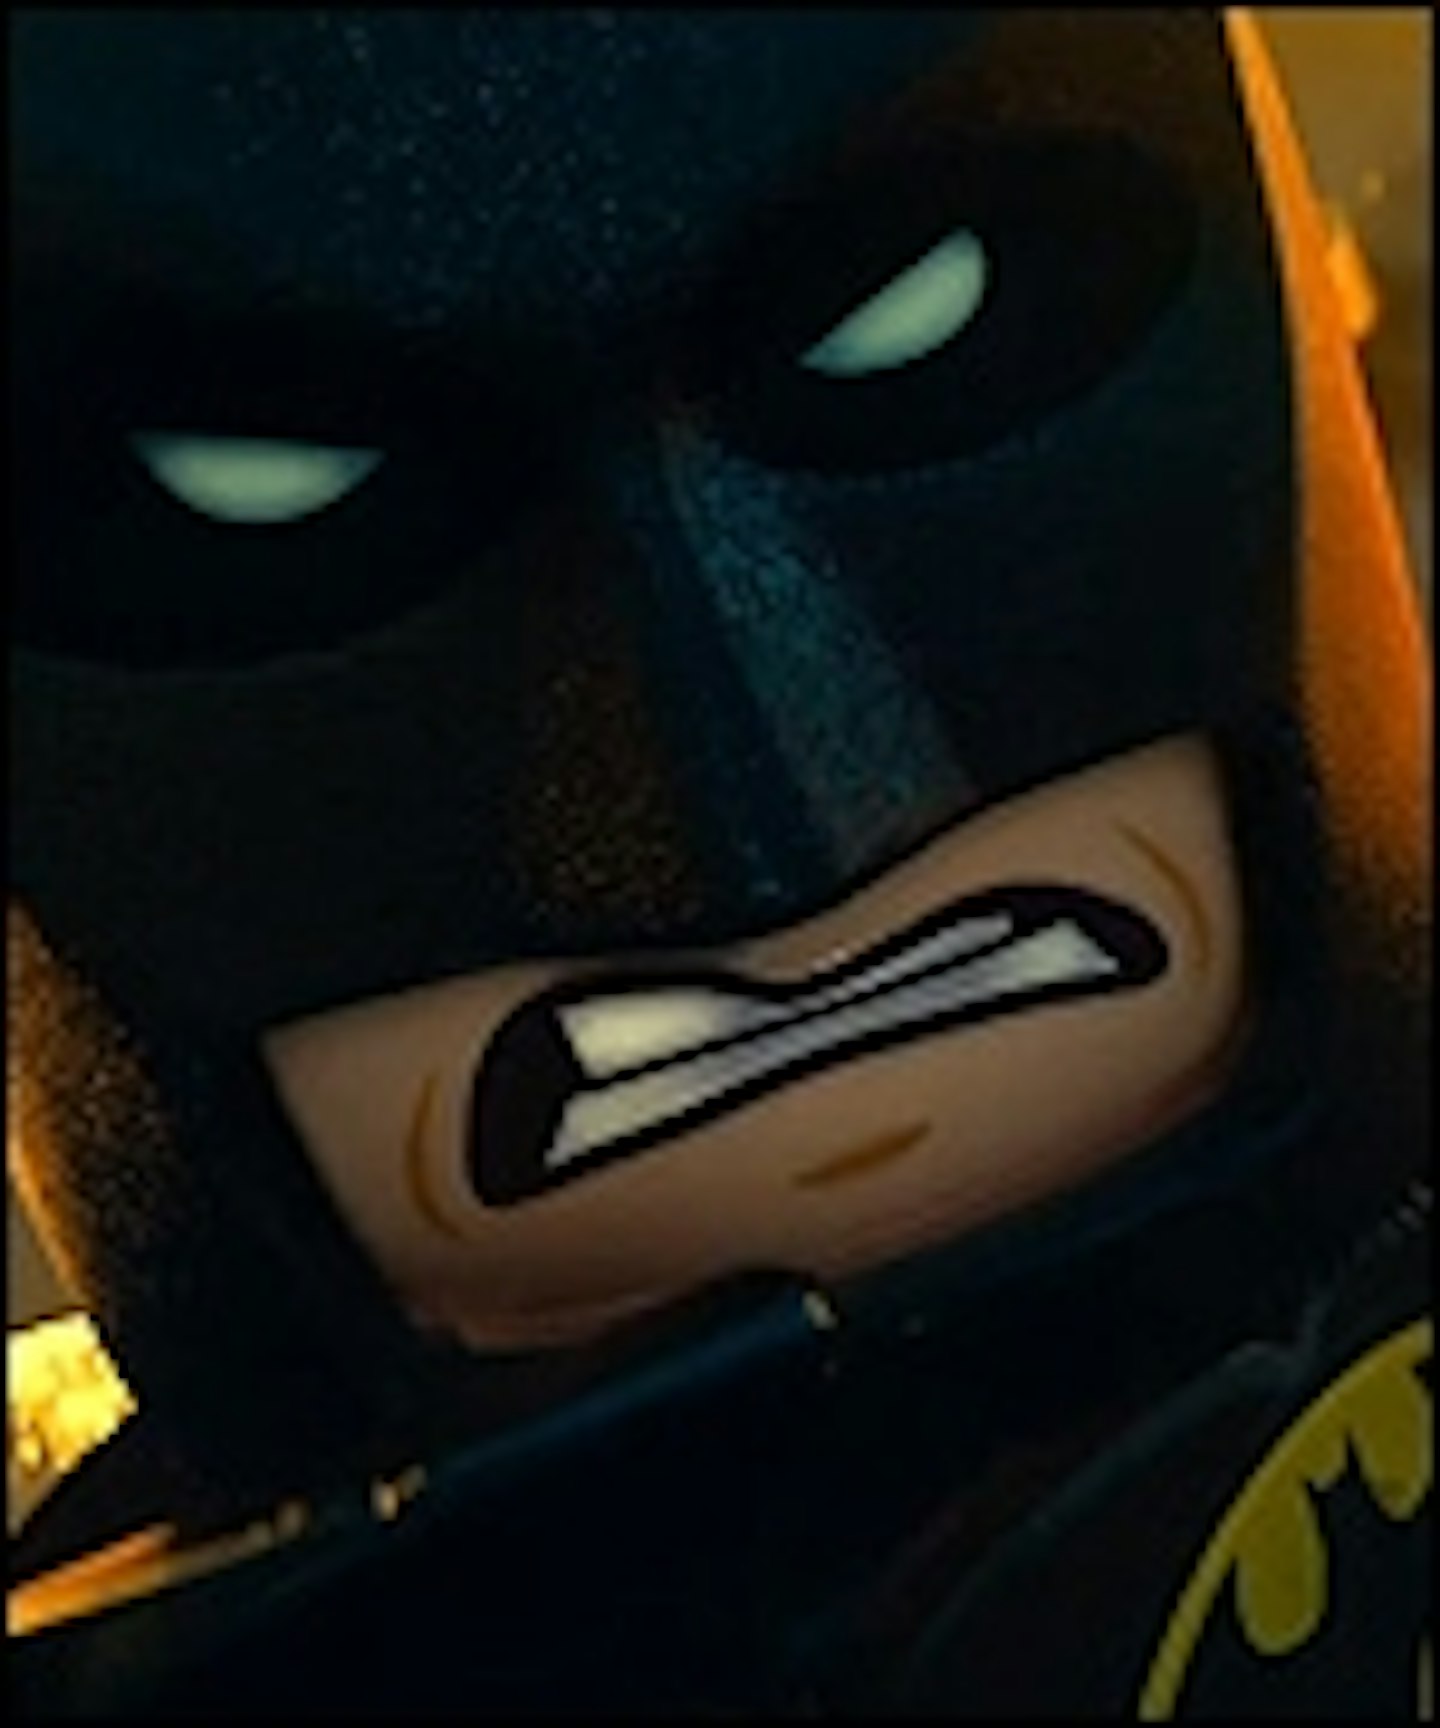 The Second Lego Movie Trailer Has Arrived